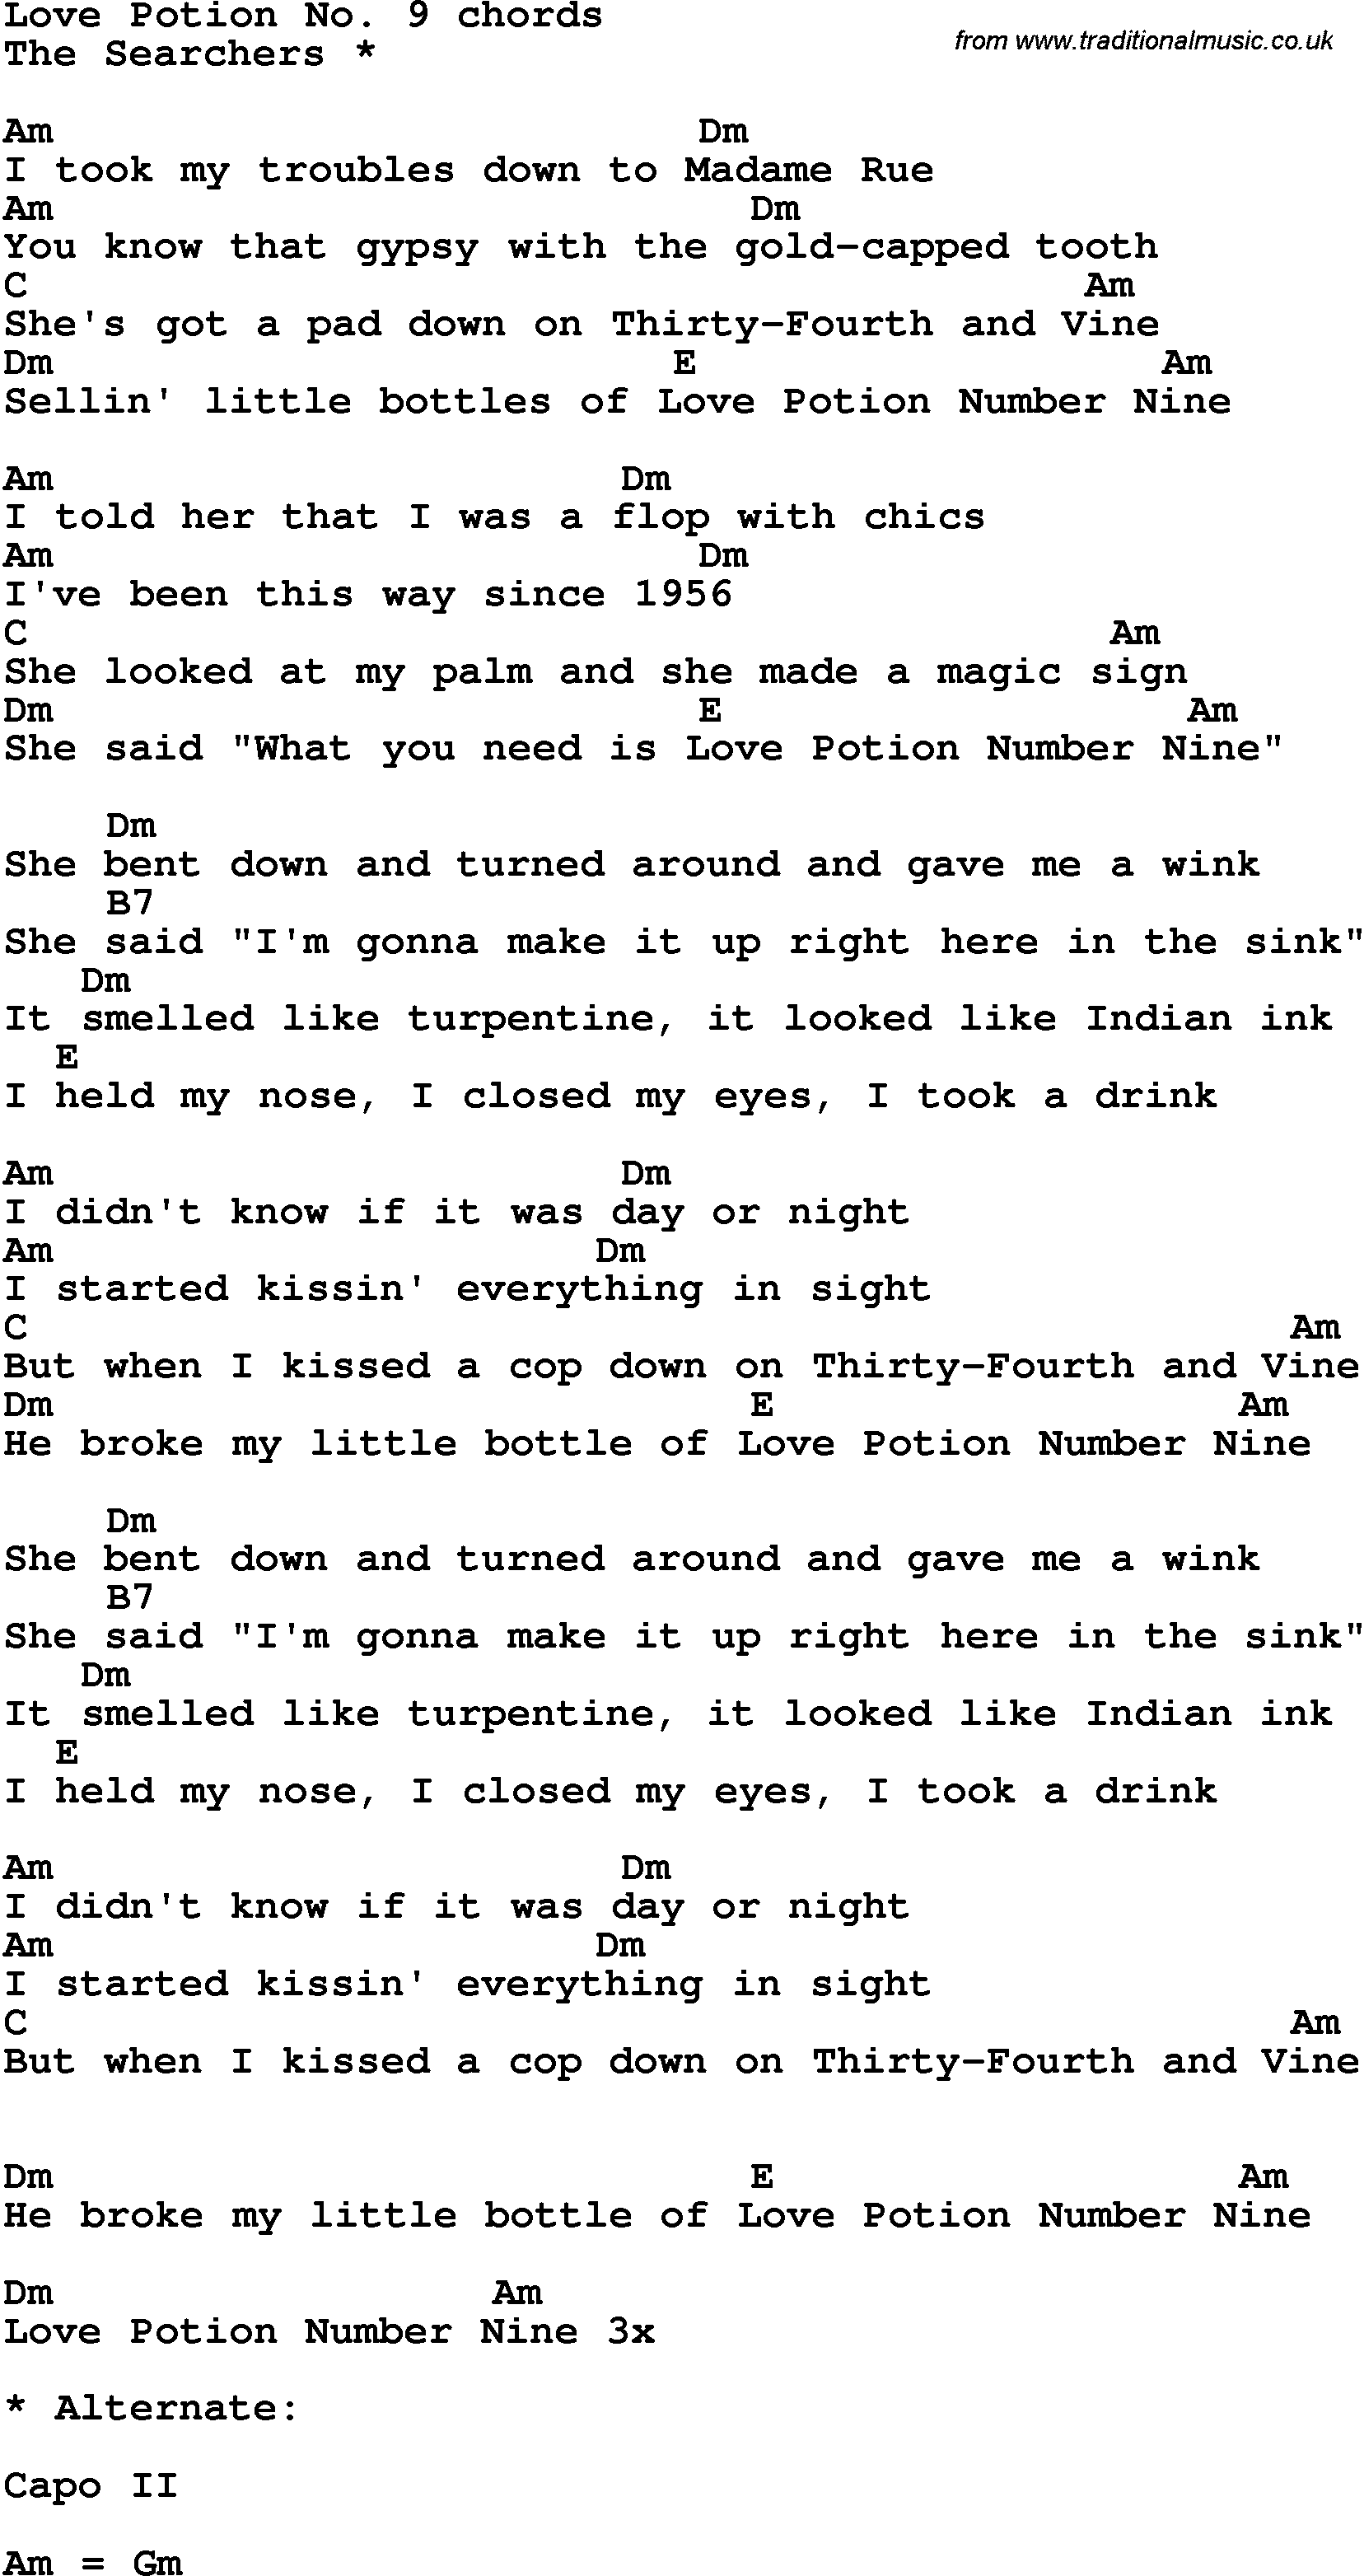 Song Lyrics with guitar chords for Love Potion No Nine